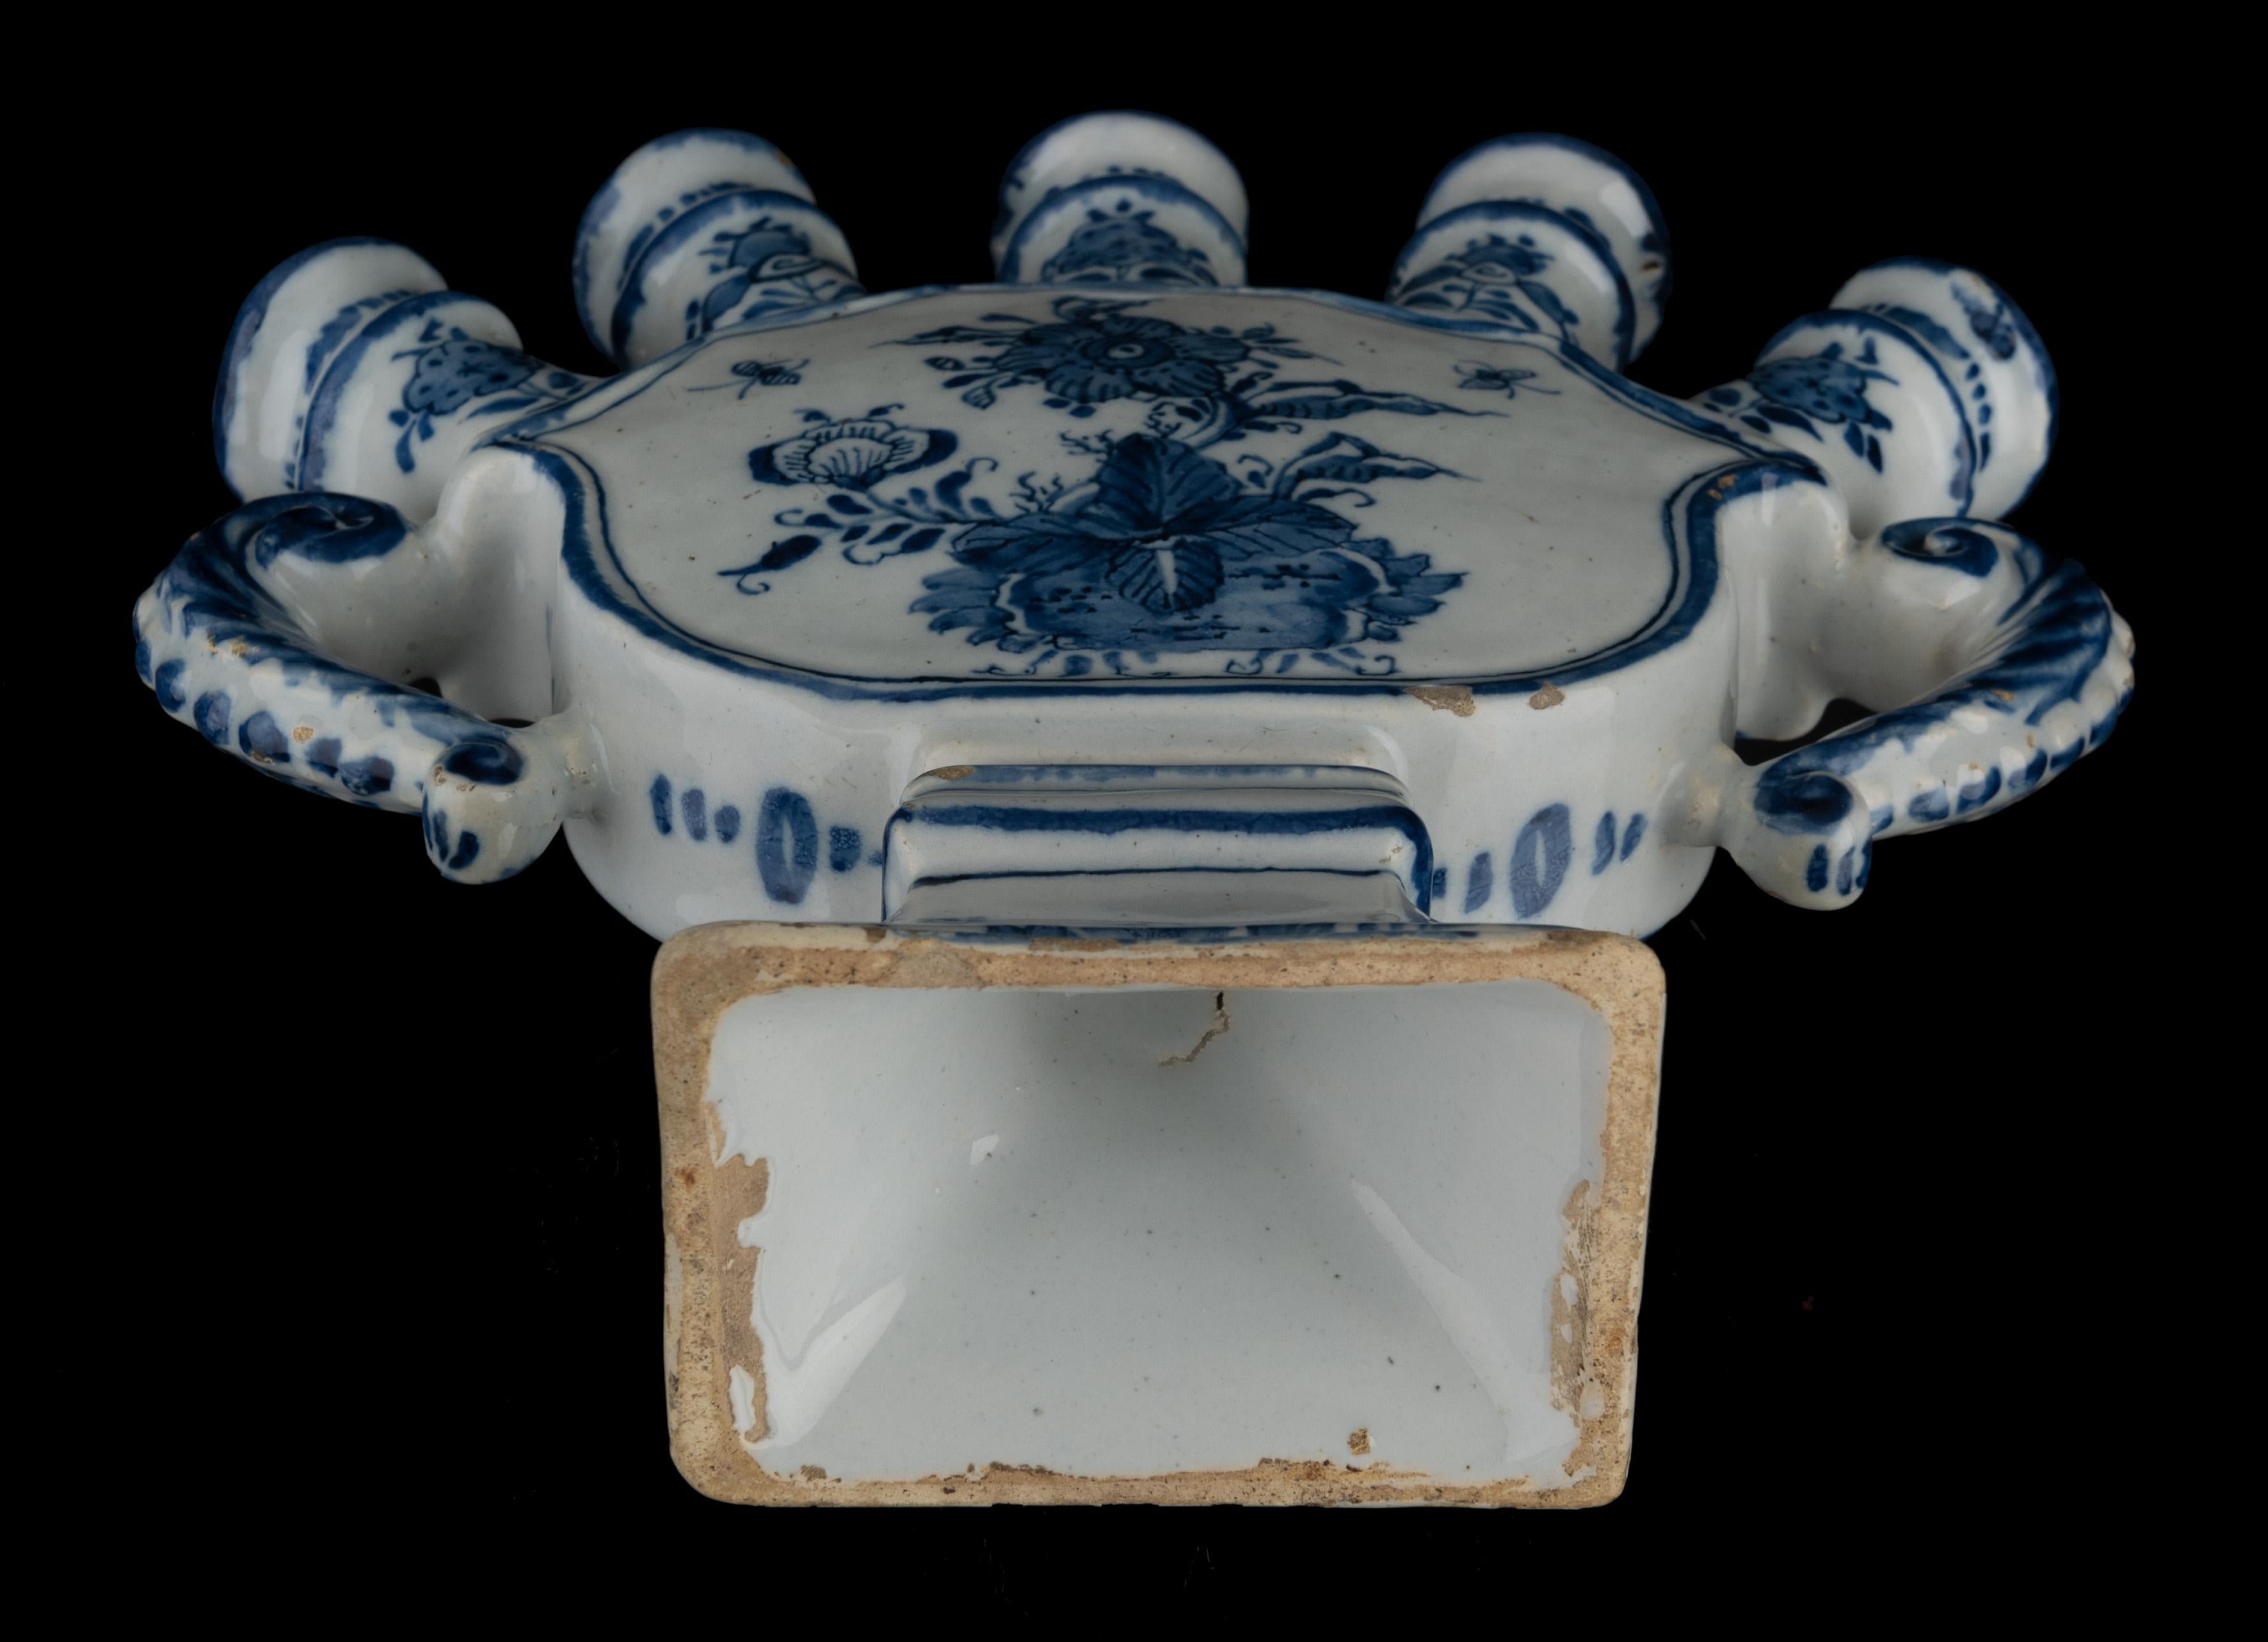 18th Century Delft Blue and White Flower Vase with Spouts 1720-1730 Tulip Vase For Sale